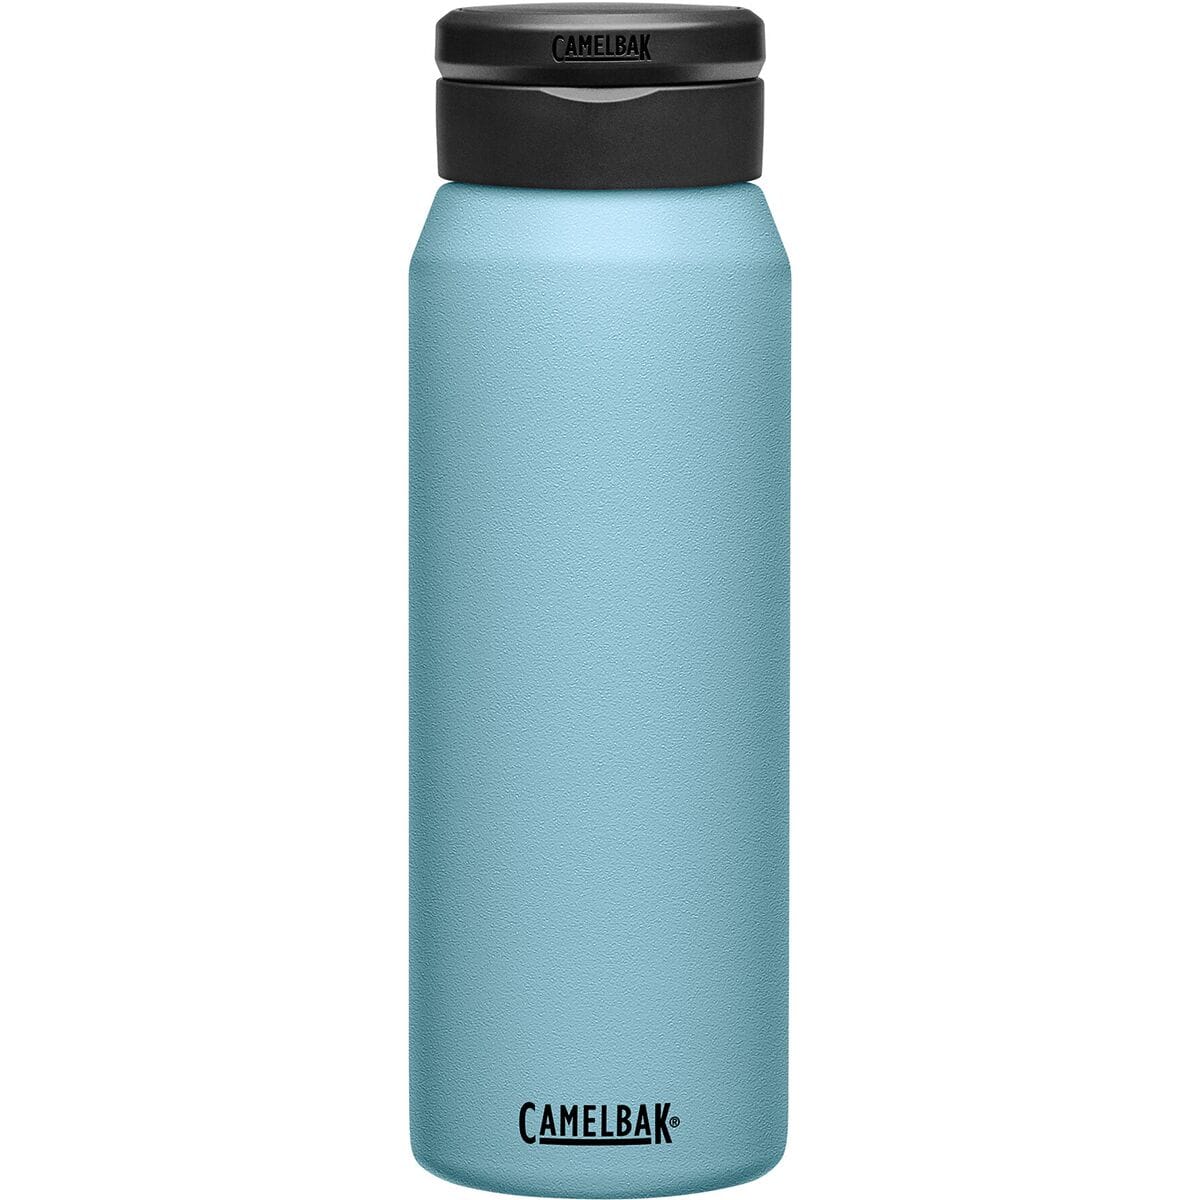 CamelBak Fit Cap 32oz Vacuum Insulated Stainless Steel Bottle